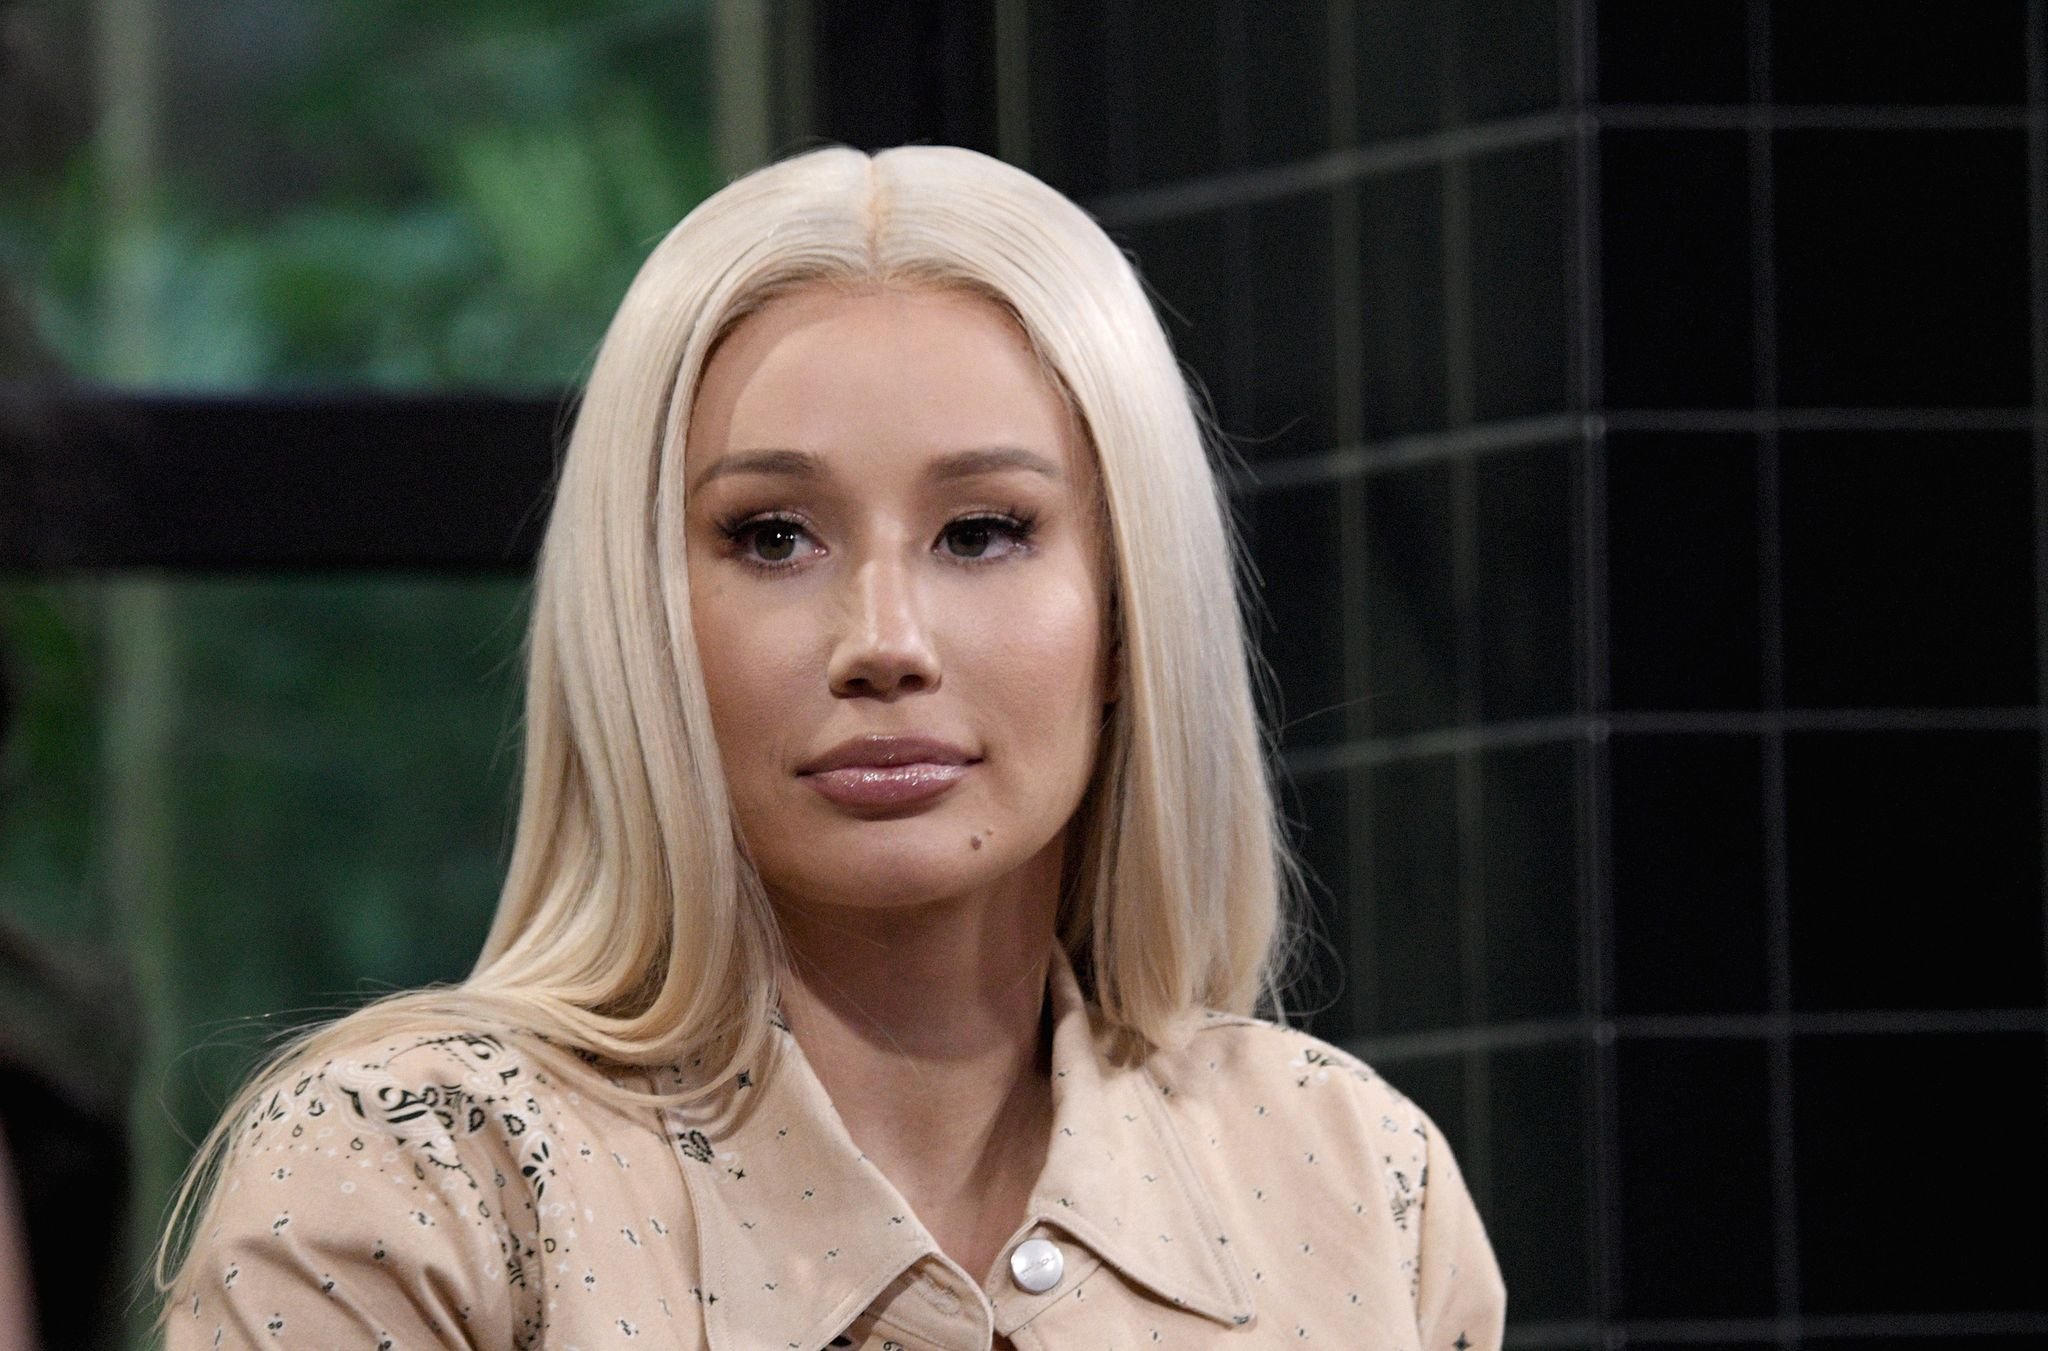 Rapper Iggy Azalea visits 'The X Change Rate' hosted by Monet X Change during the Build Series at Build Studio on July 25, 2019 in New York City. | Photo: Getty Images